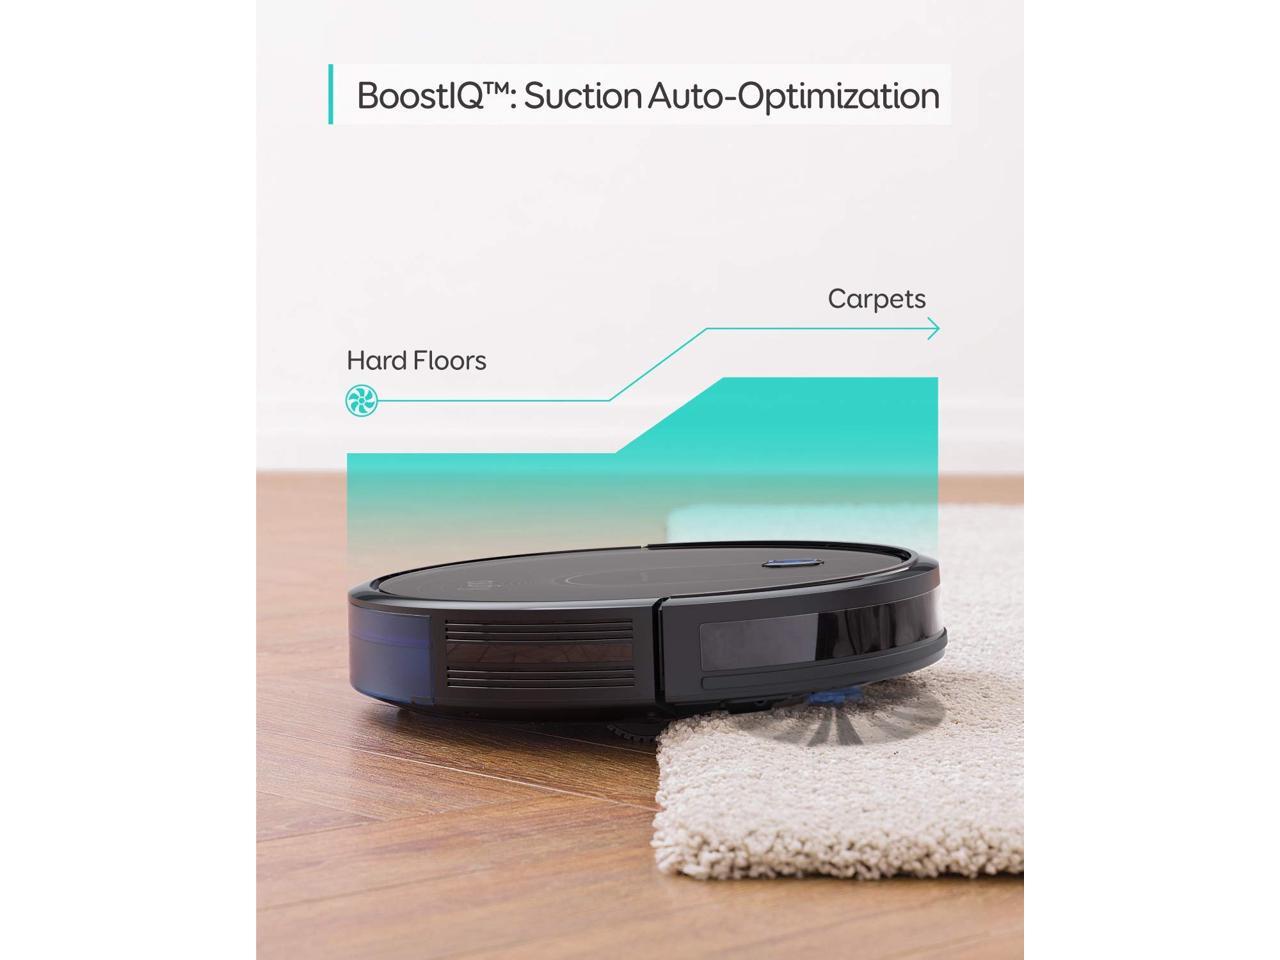 BoostIQ RoboVac 12, Upgraded, Super-Thin, 1500Pa Strong Suction, Quiet, Self-Charging Robotic Vacuum Cleaner, Cleans Hard Floors to Medium-Pile Carpets Eufy